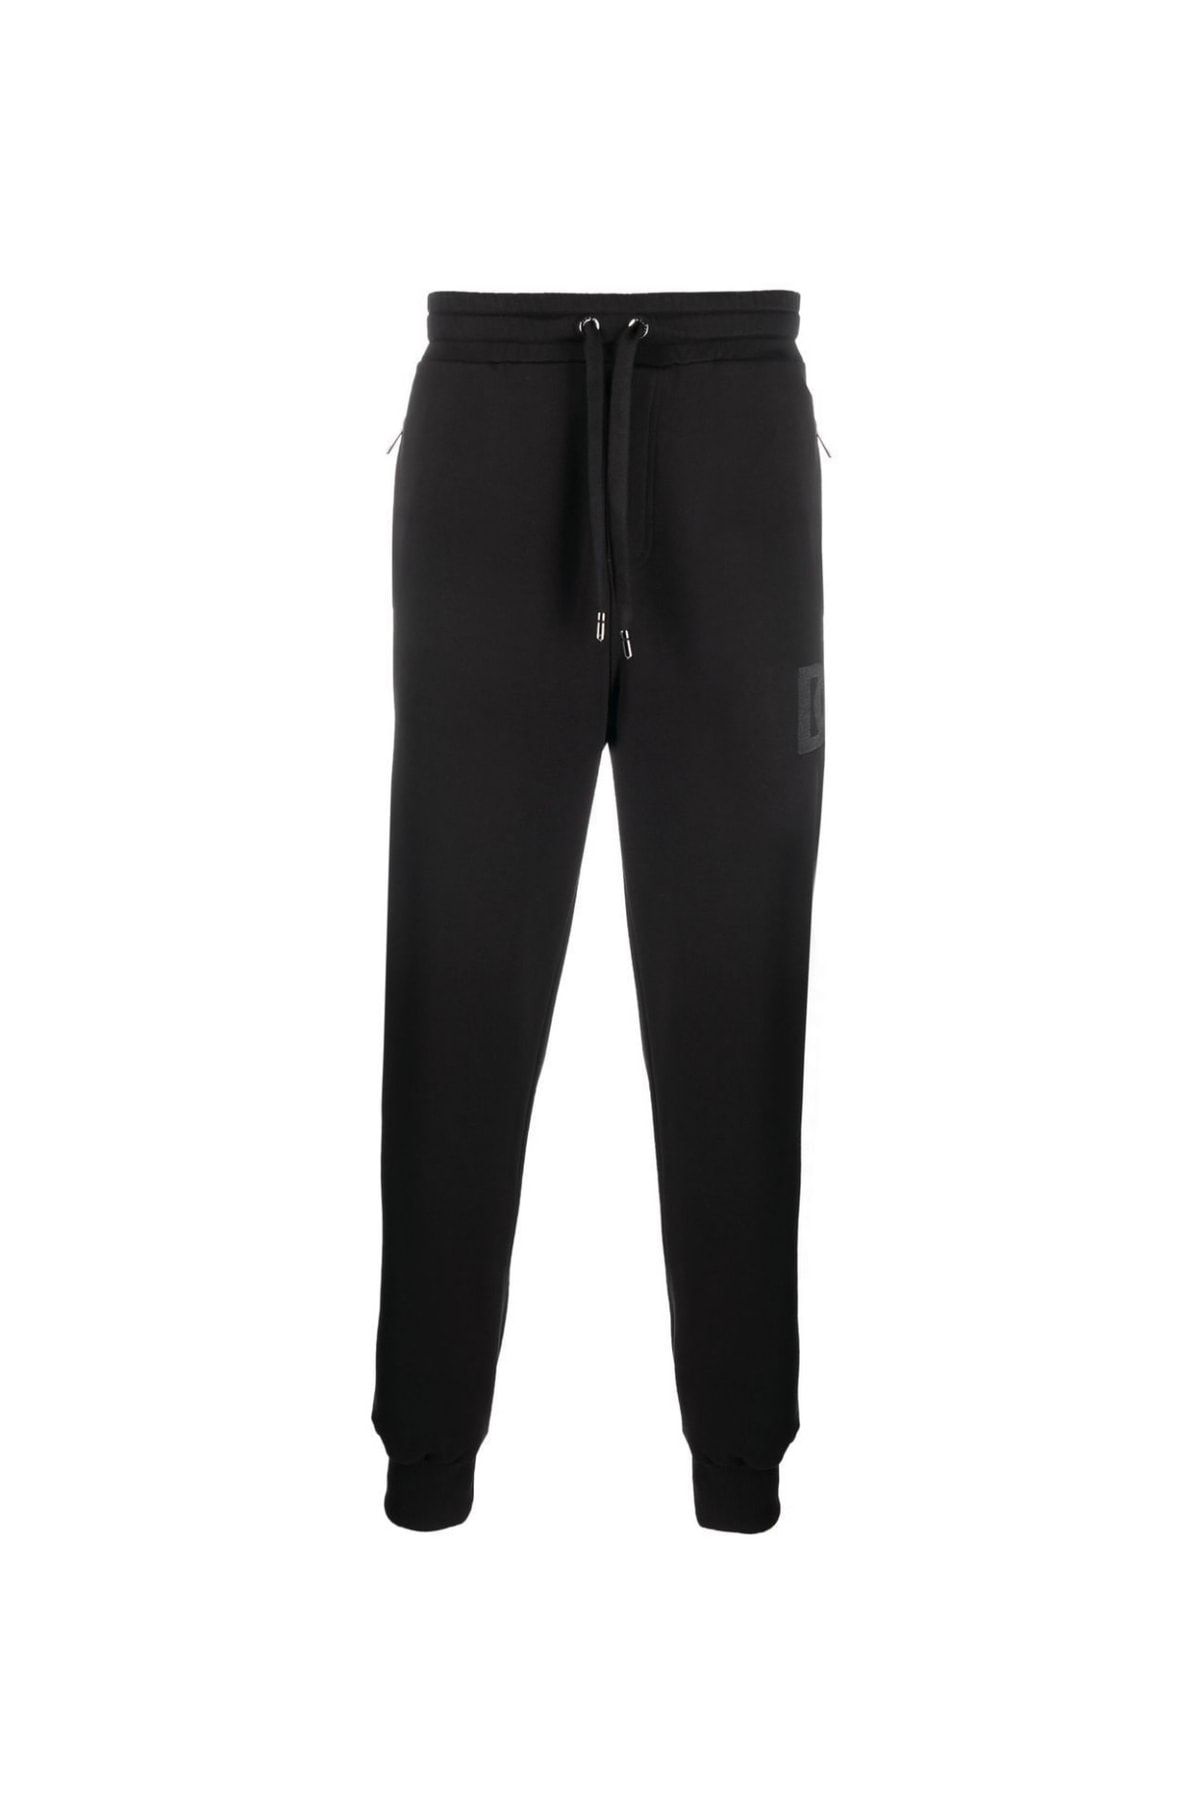 Dolce&Gabbana Logo Embroidered Track Pants